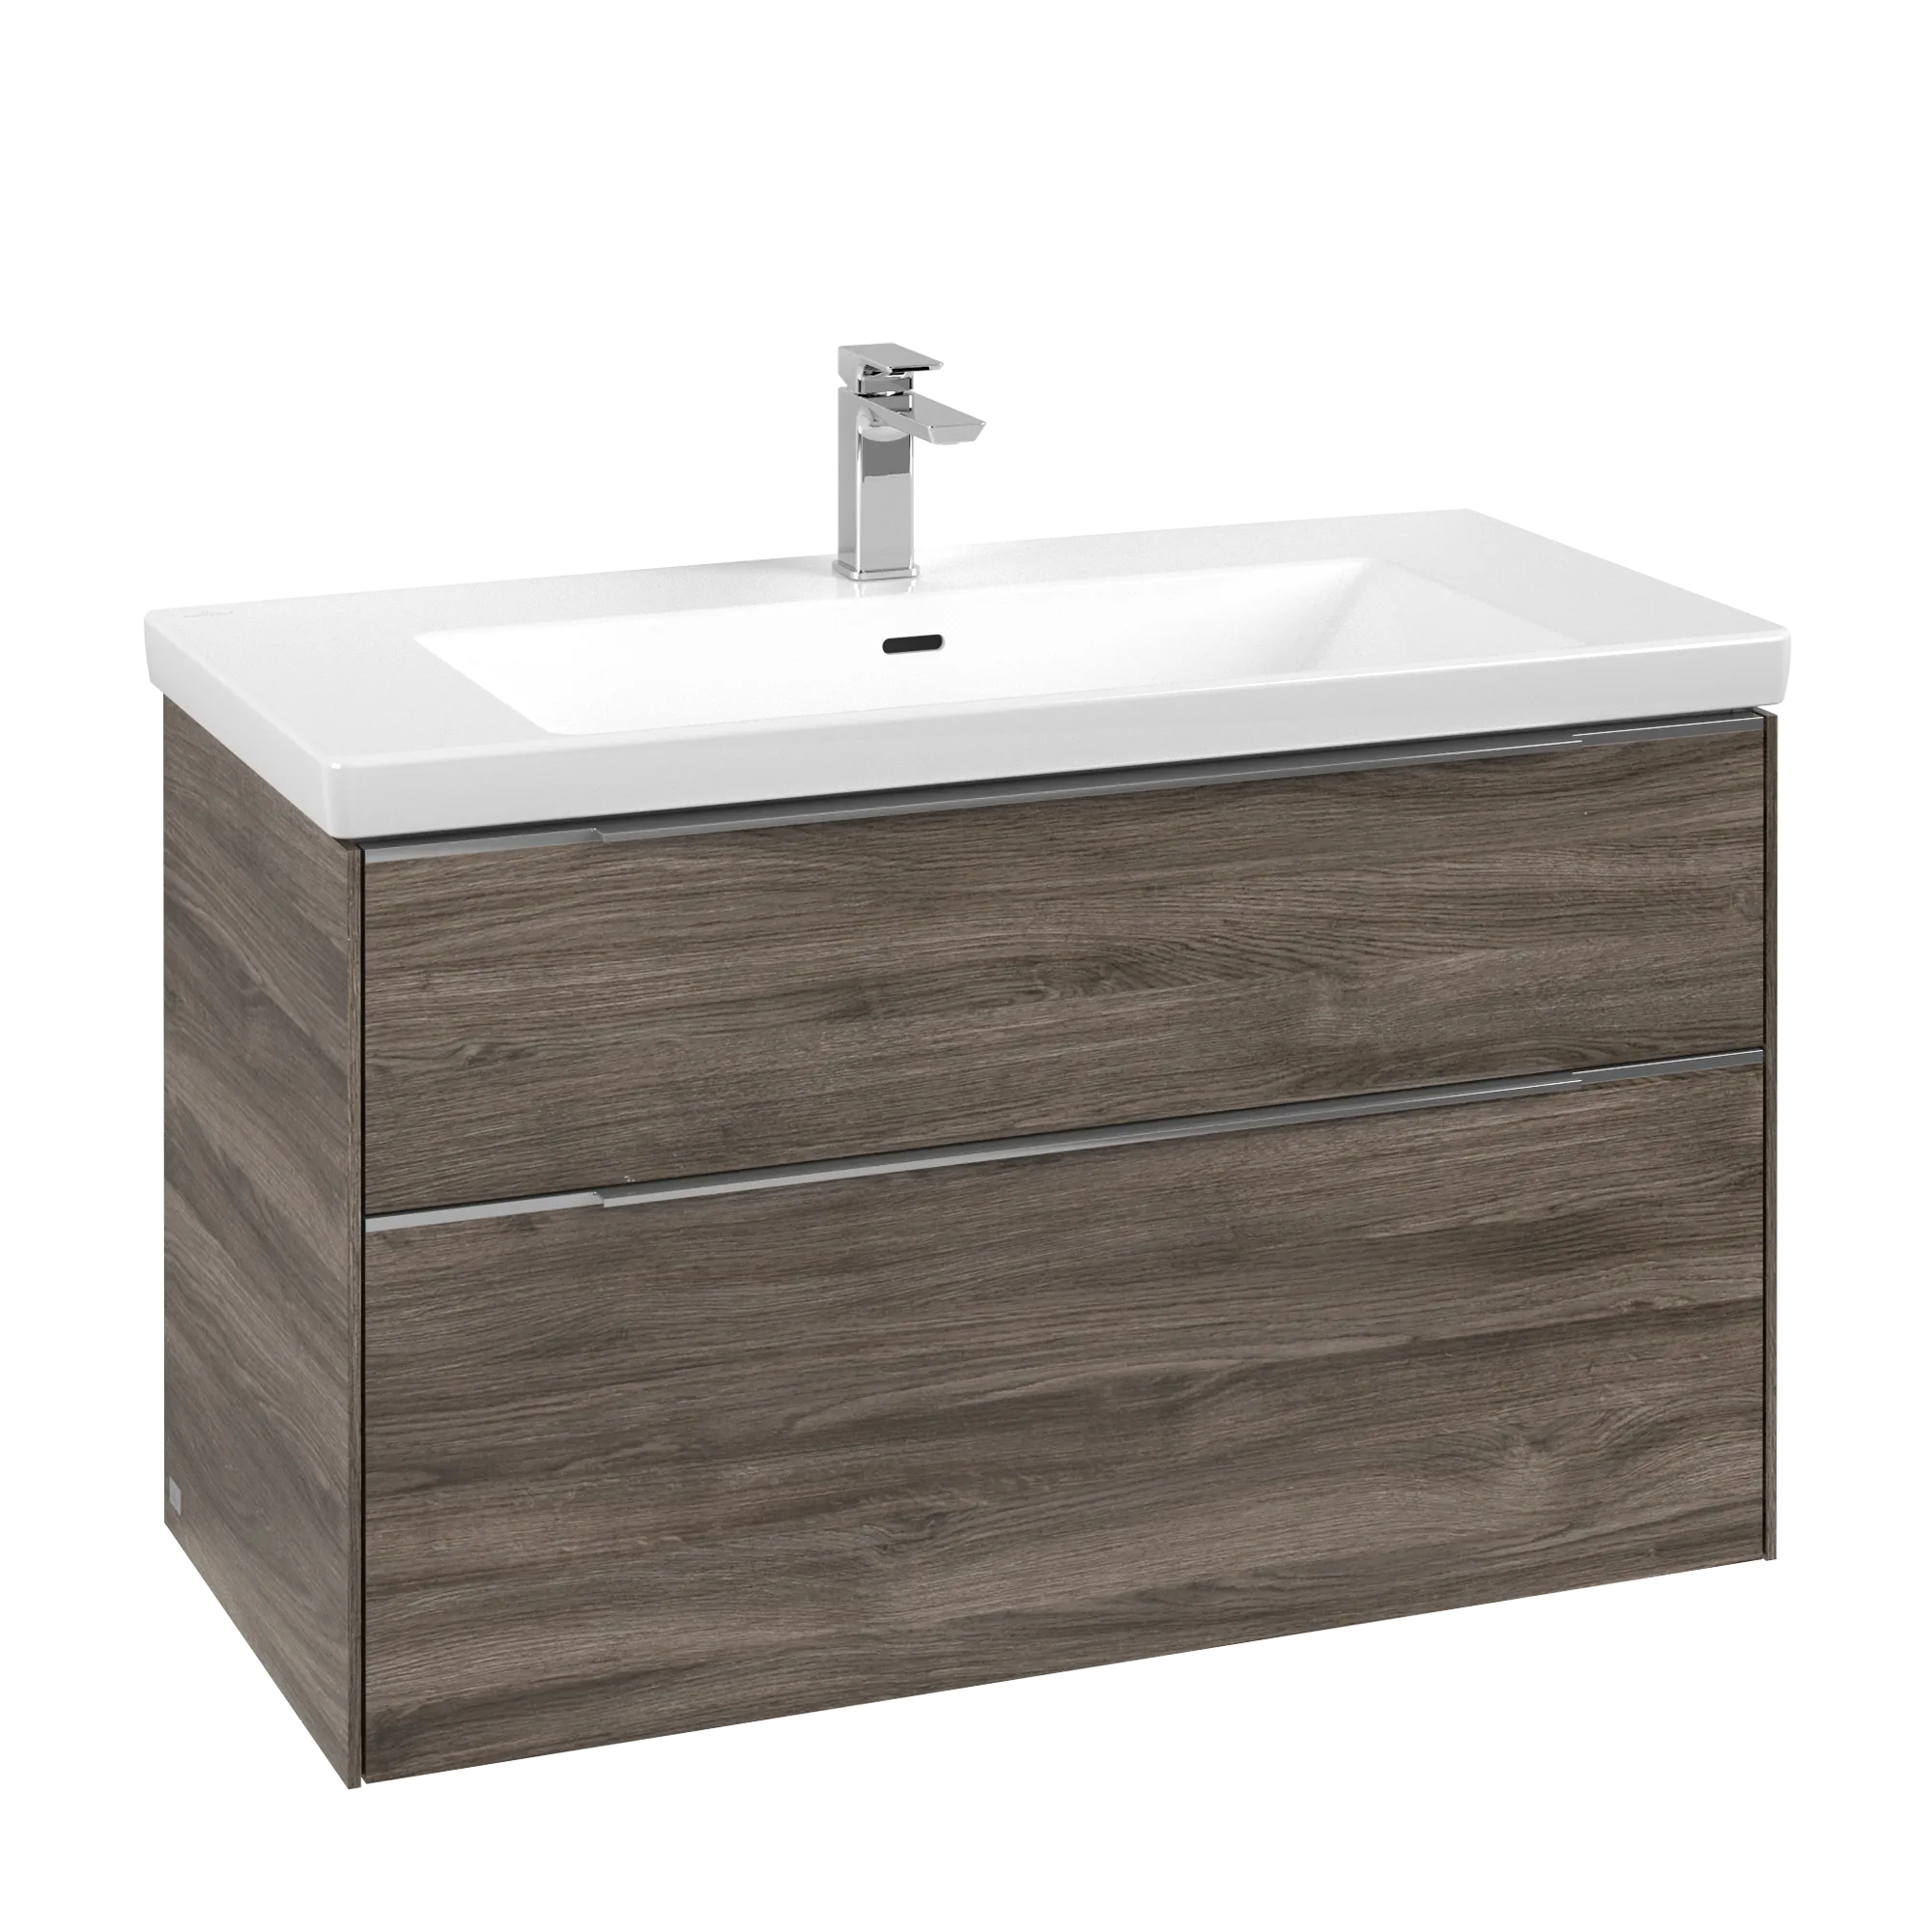 VILLEROY BOCH Subway 3.0 Vanity unit, with lighting, 2 pull-out compartments, 973 x 576 x 478 mm, Stone Oak #C570L0RK resmi